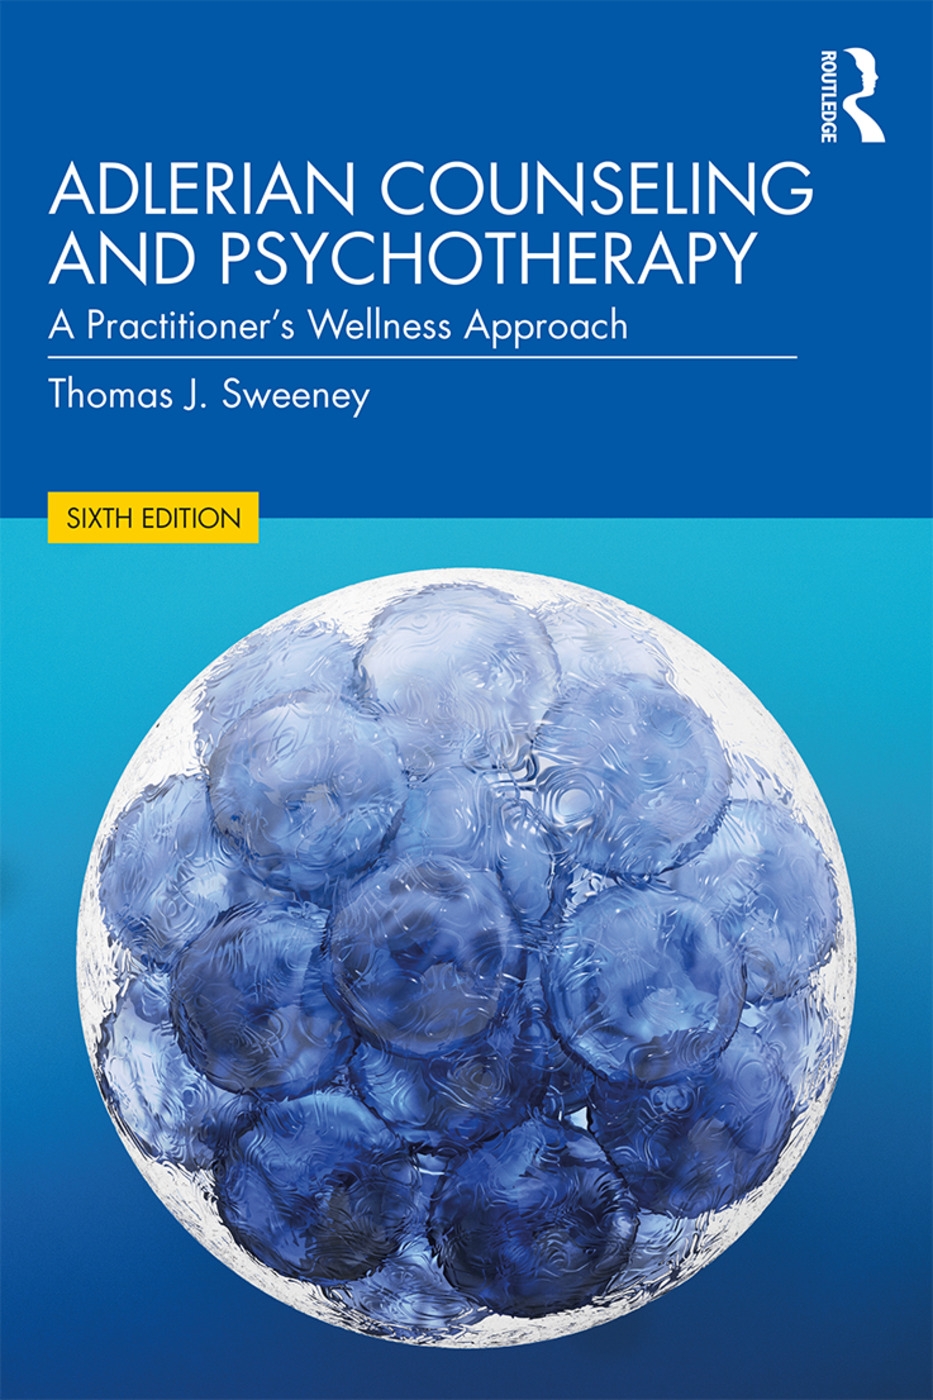 Adlerian Counseling and Psychotherapy: A Practitioner’s Wellness Approach